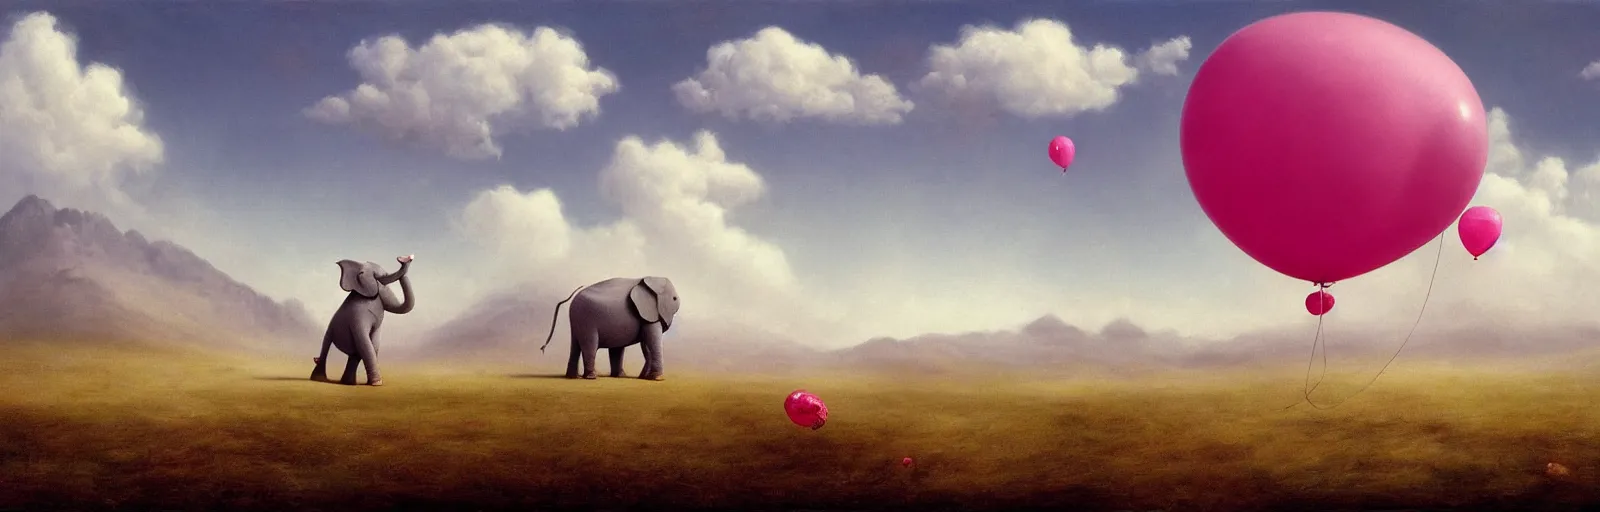 Prompt: A pink elephant happily walking in a field of clouds, balloons in the sky, mountains in the background, illustration, detailed, smooth, soft, warm, by Adolf Lachman, Shaun Tan, Surrealism